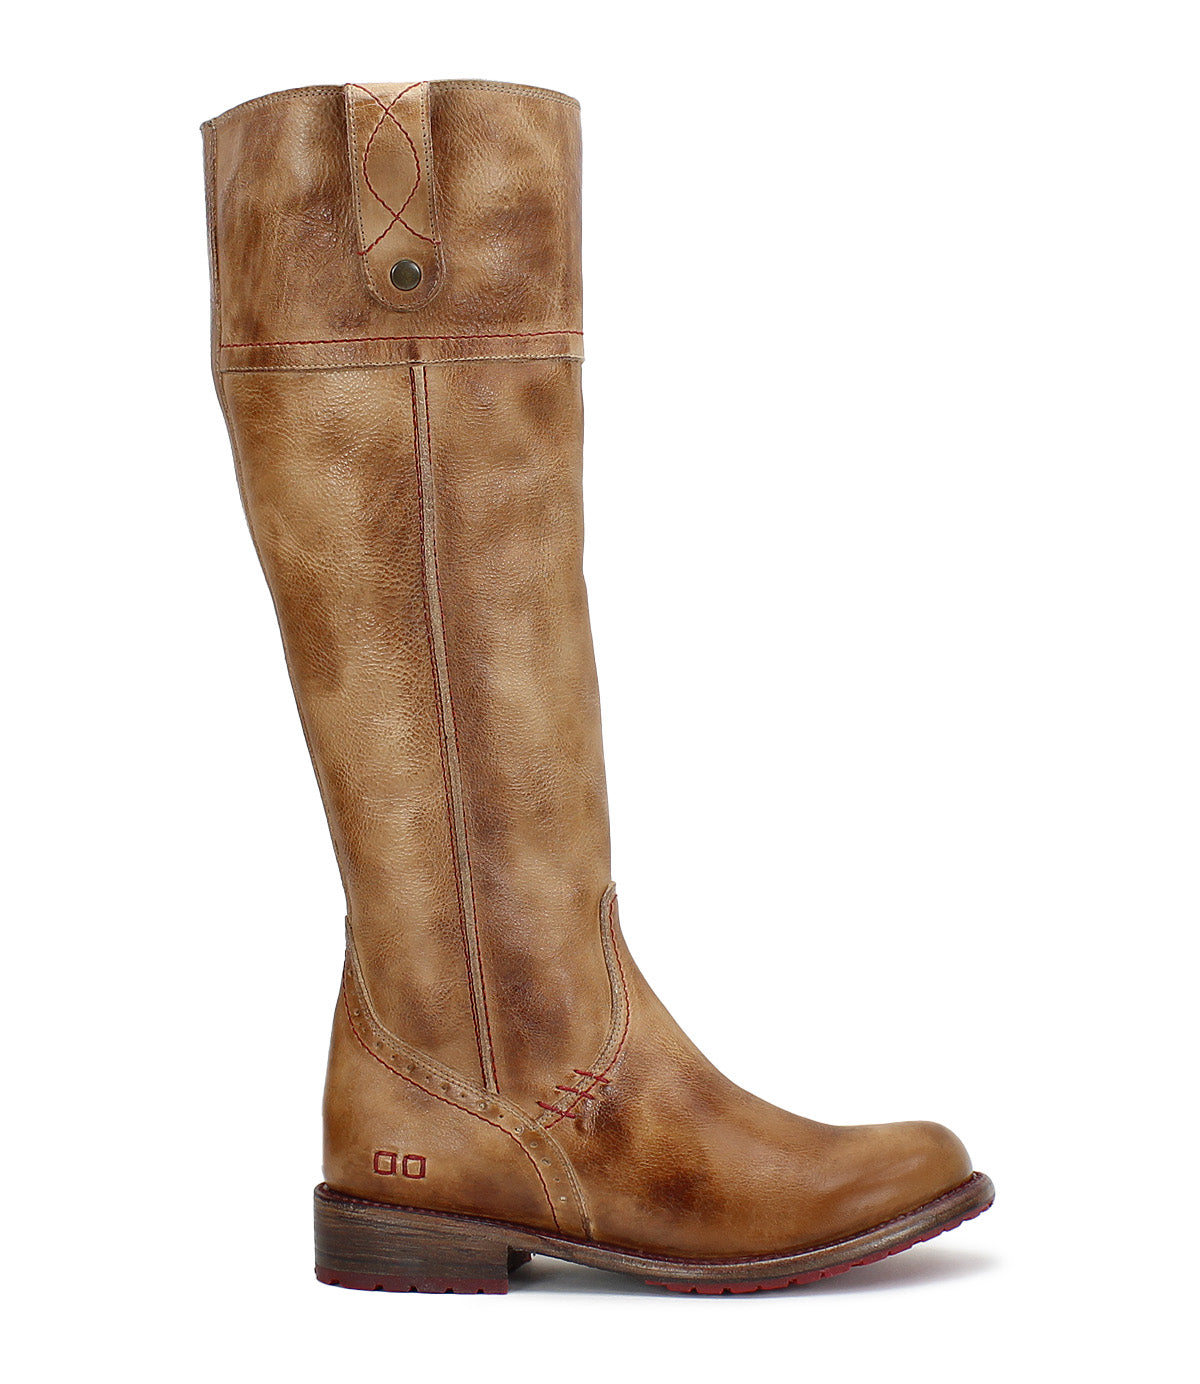 A women's Bed Stu Jacqueline riding boot in tan leather.